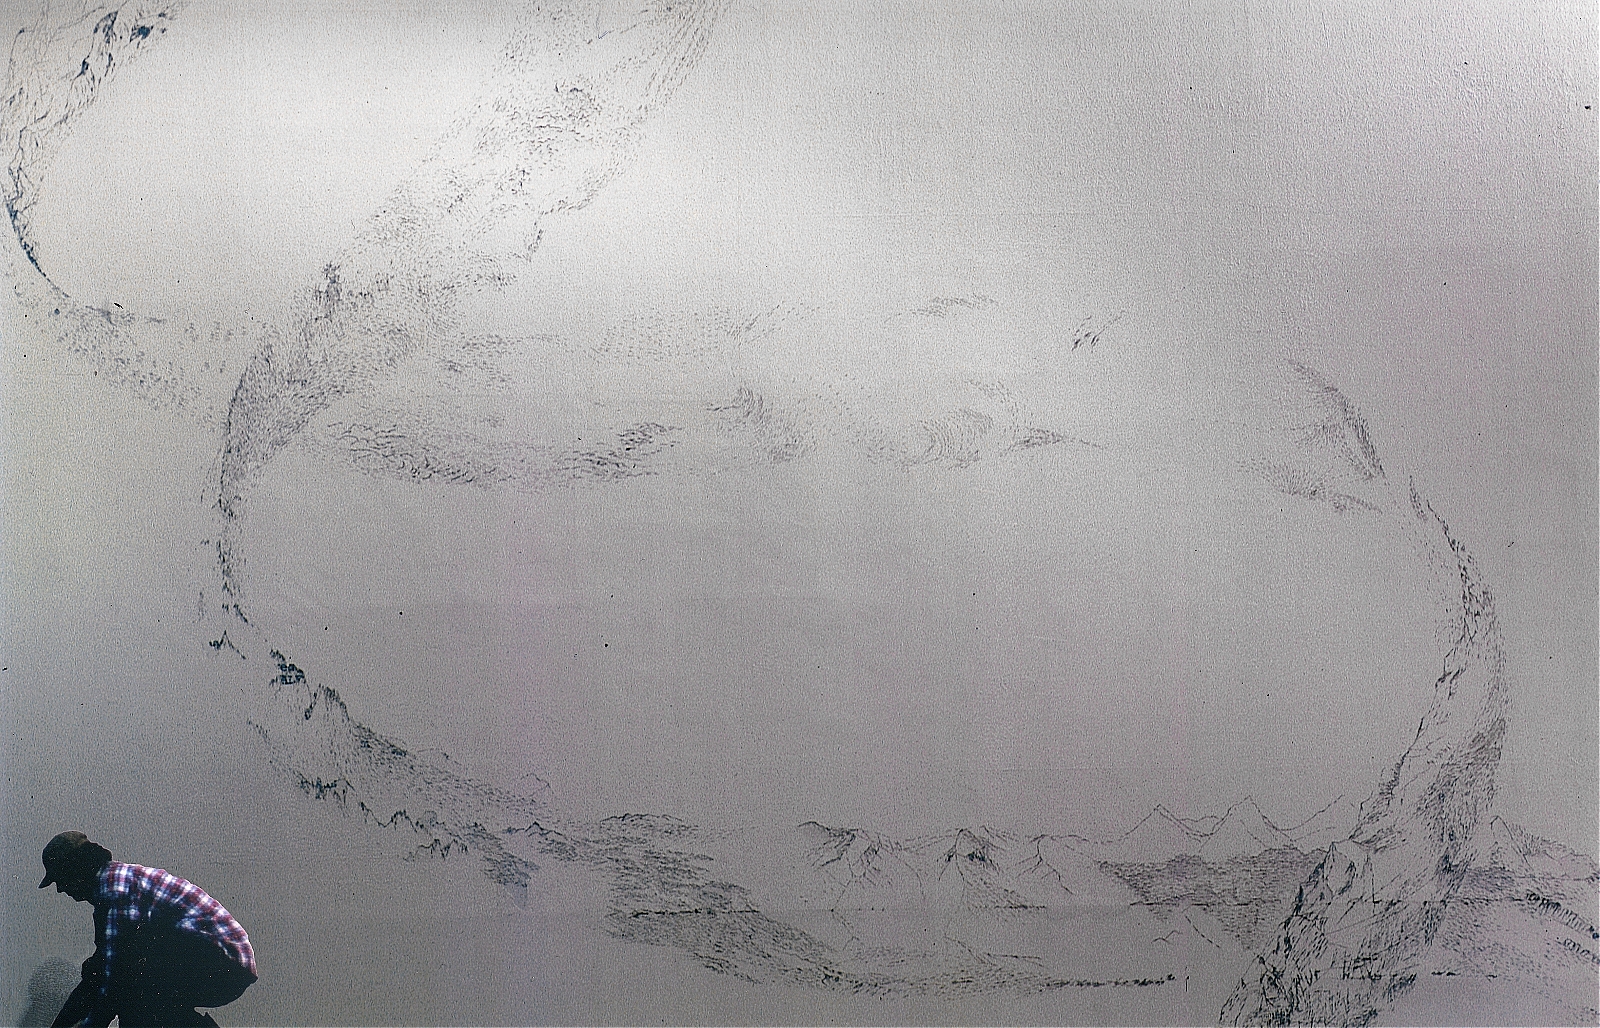 "Slope". 2000, staples on wall, appr. 800 x 500 cm